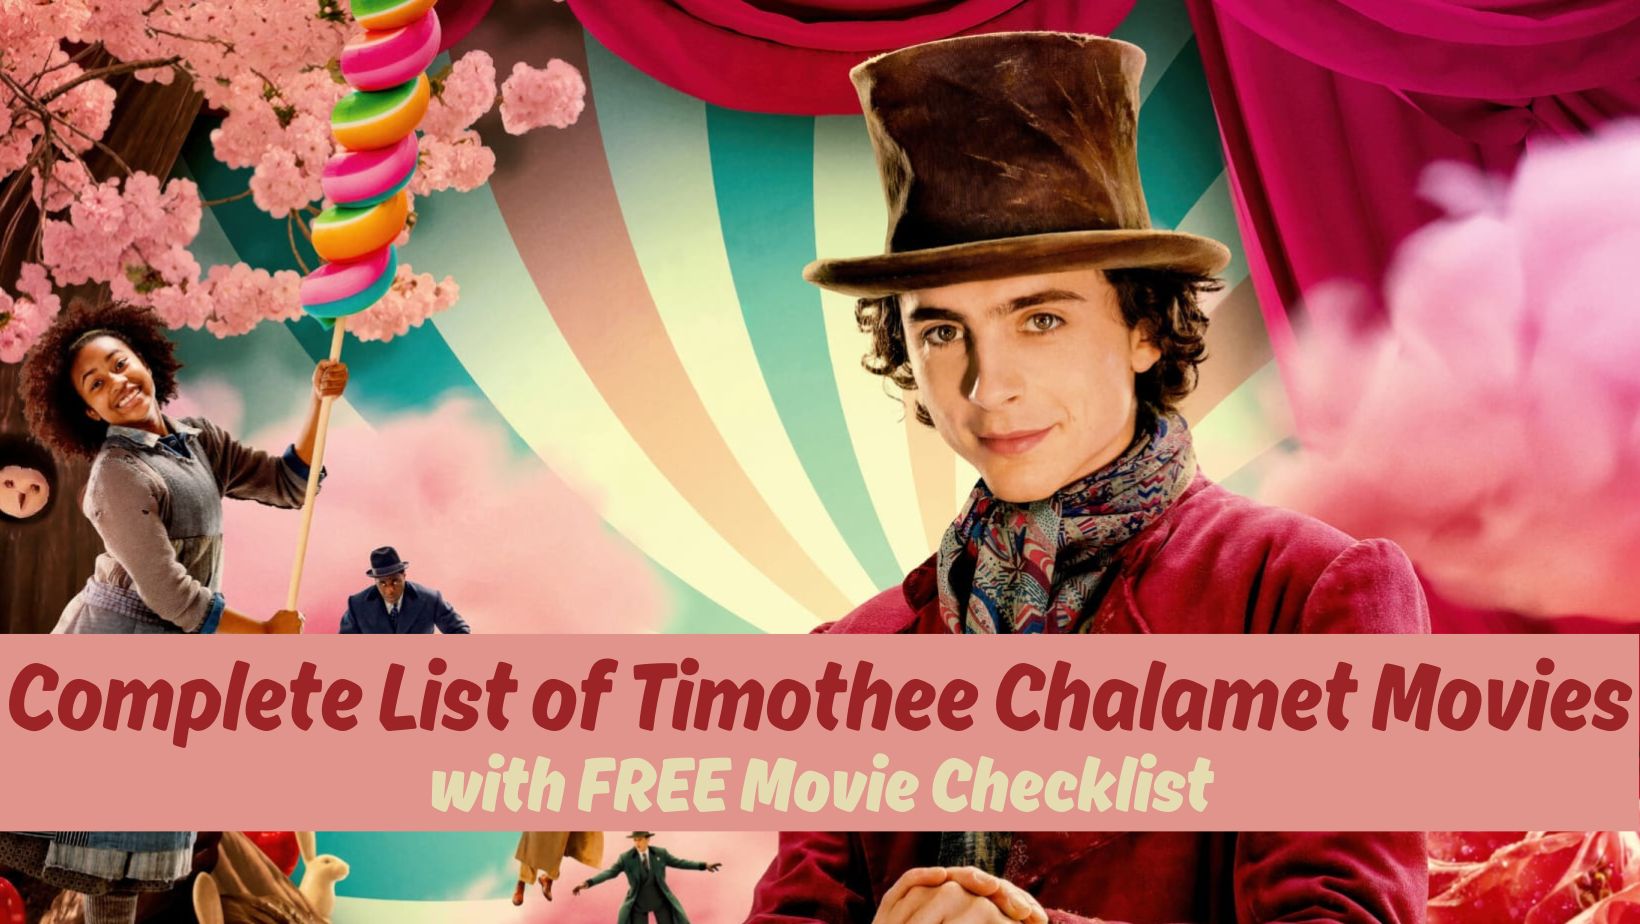 Full List of All Timothee Chalamet Movies – Free Movie List Checklist